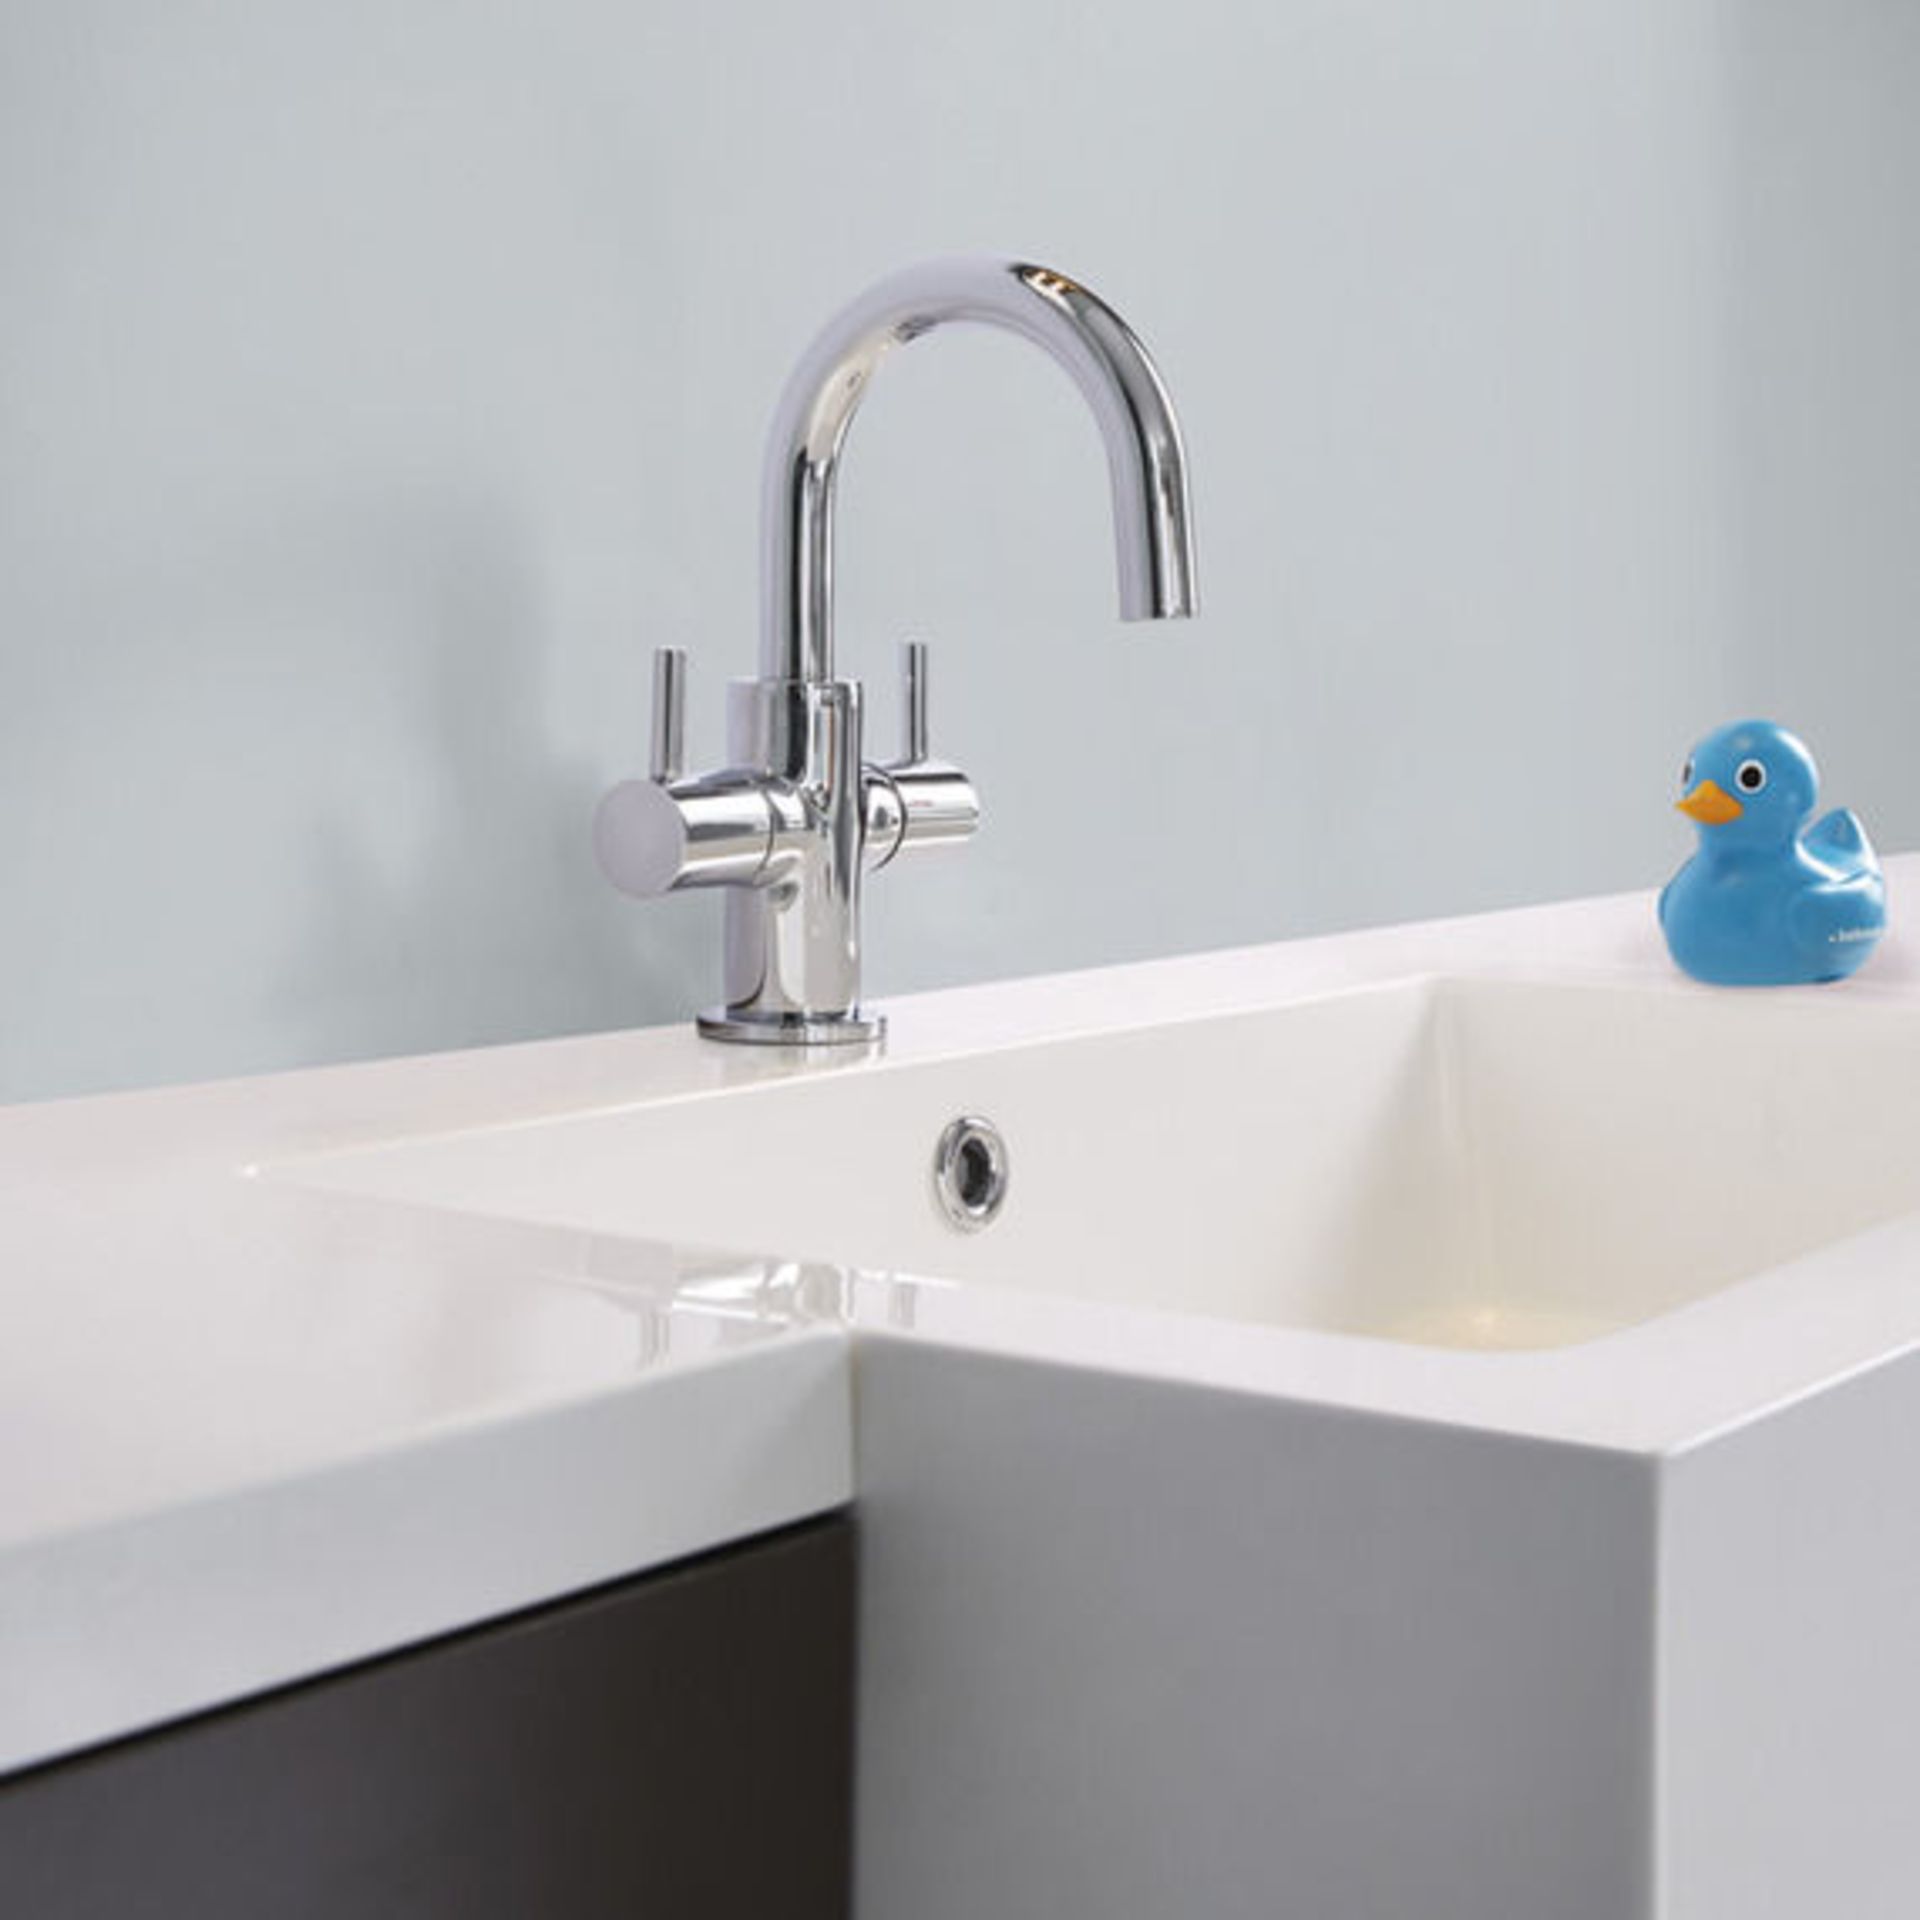 Compact swan necked basin mixer tap - Image 2 of 2